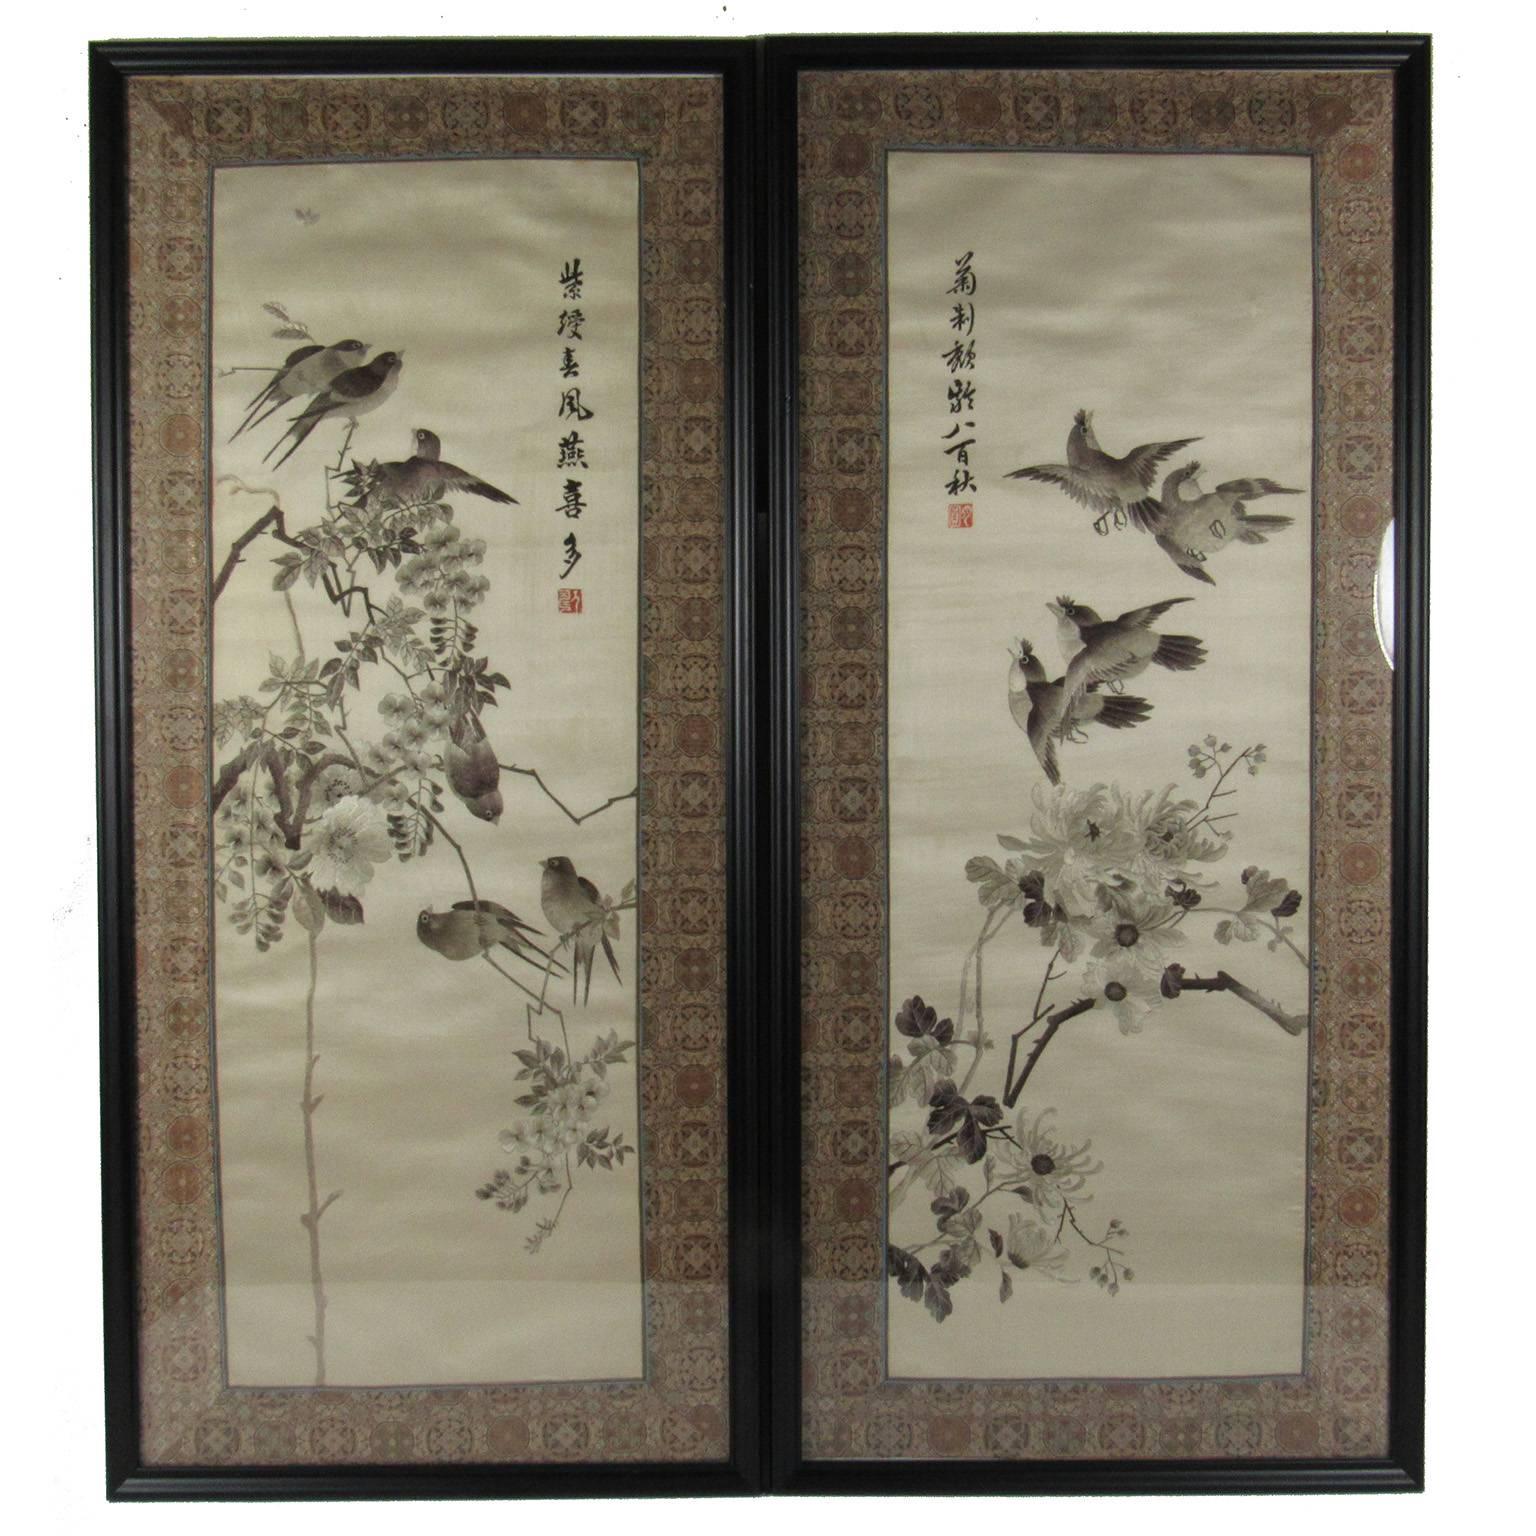 Set of four Chinese embroidered silk panels depicting the four seasons with birds and flowers, mid-20th century. Each panel with embroidered in white black and gray tones with inscription and chopmark.
Measure: Each panel 38 x 13 1/4 inches;